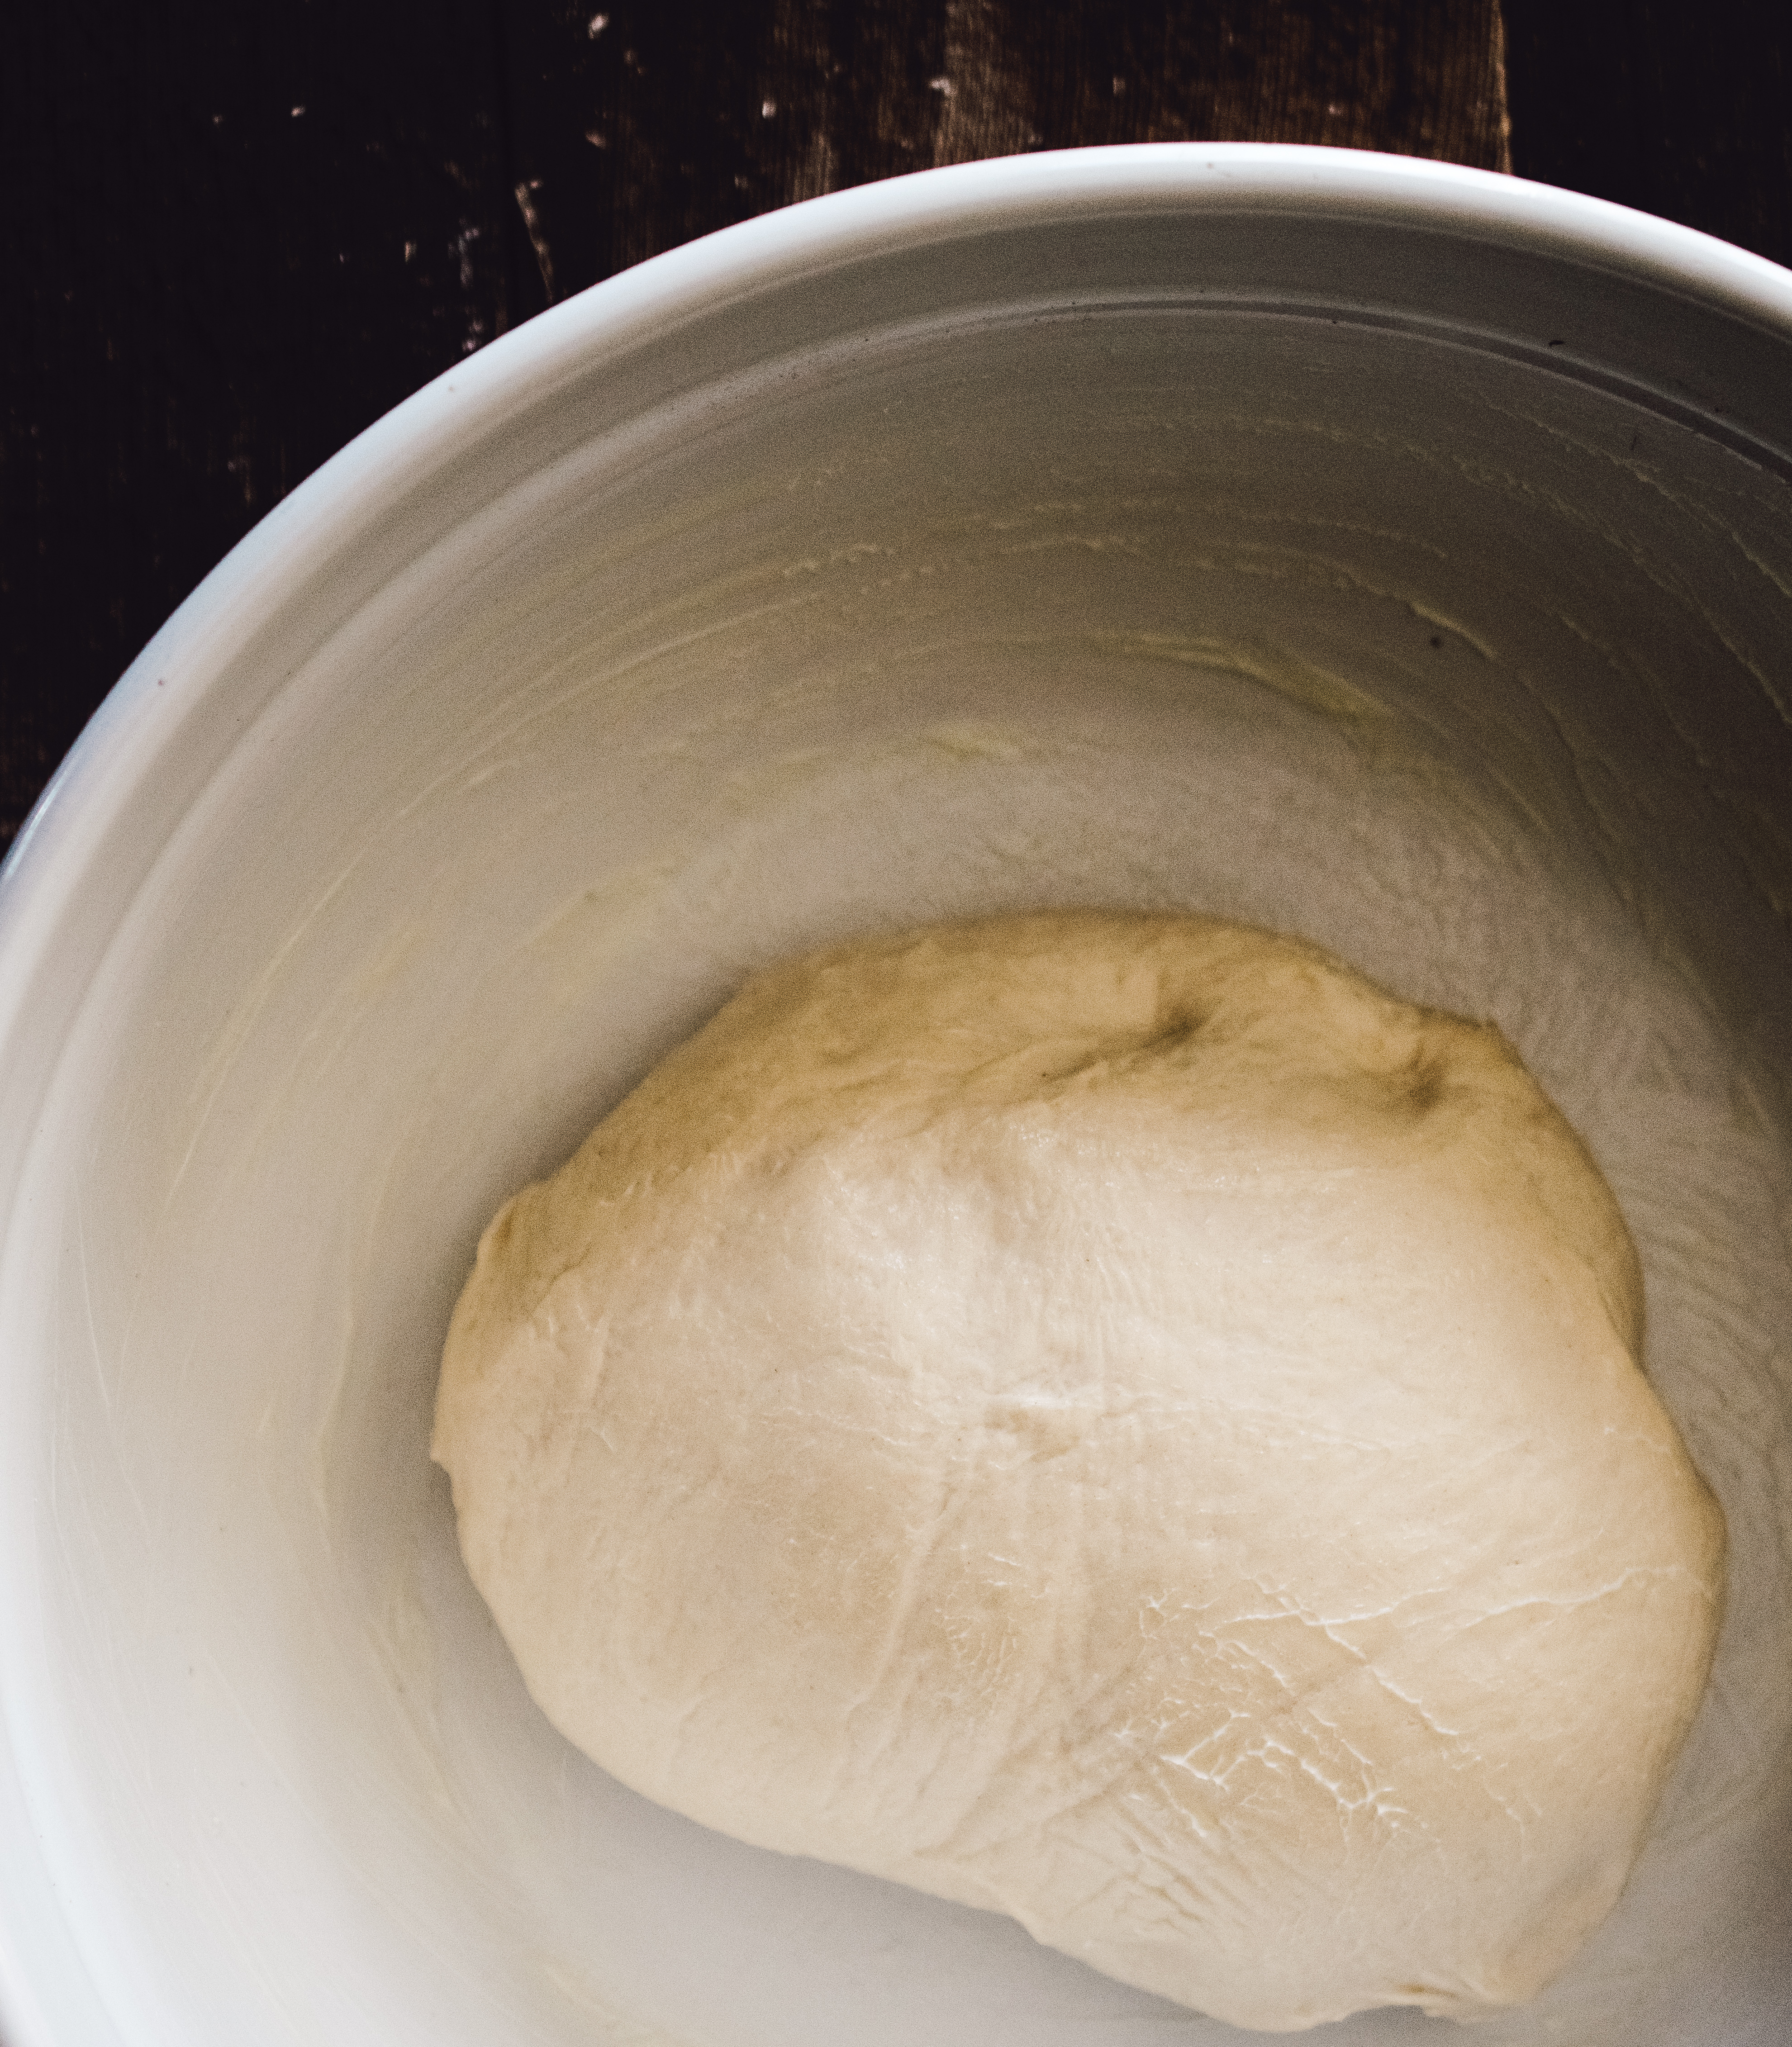 Ball of homemade white bread dough after kneading, showing desired texture, sitting in a greased bowl ready to begin first rise